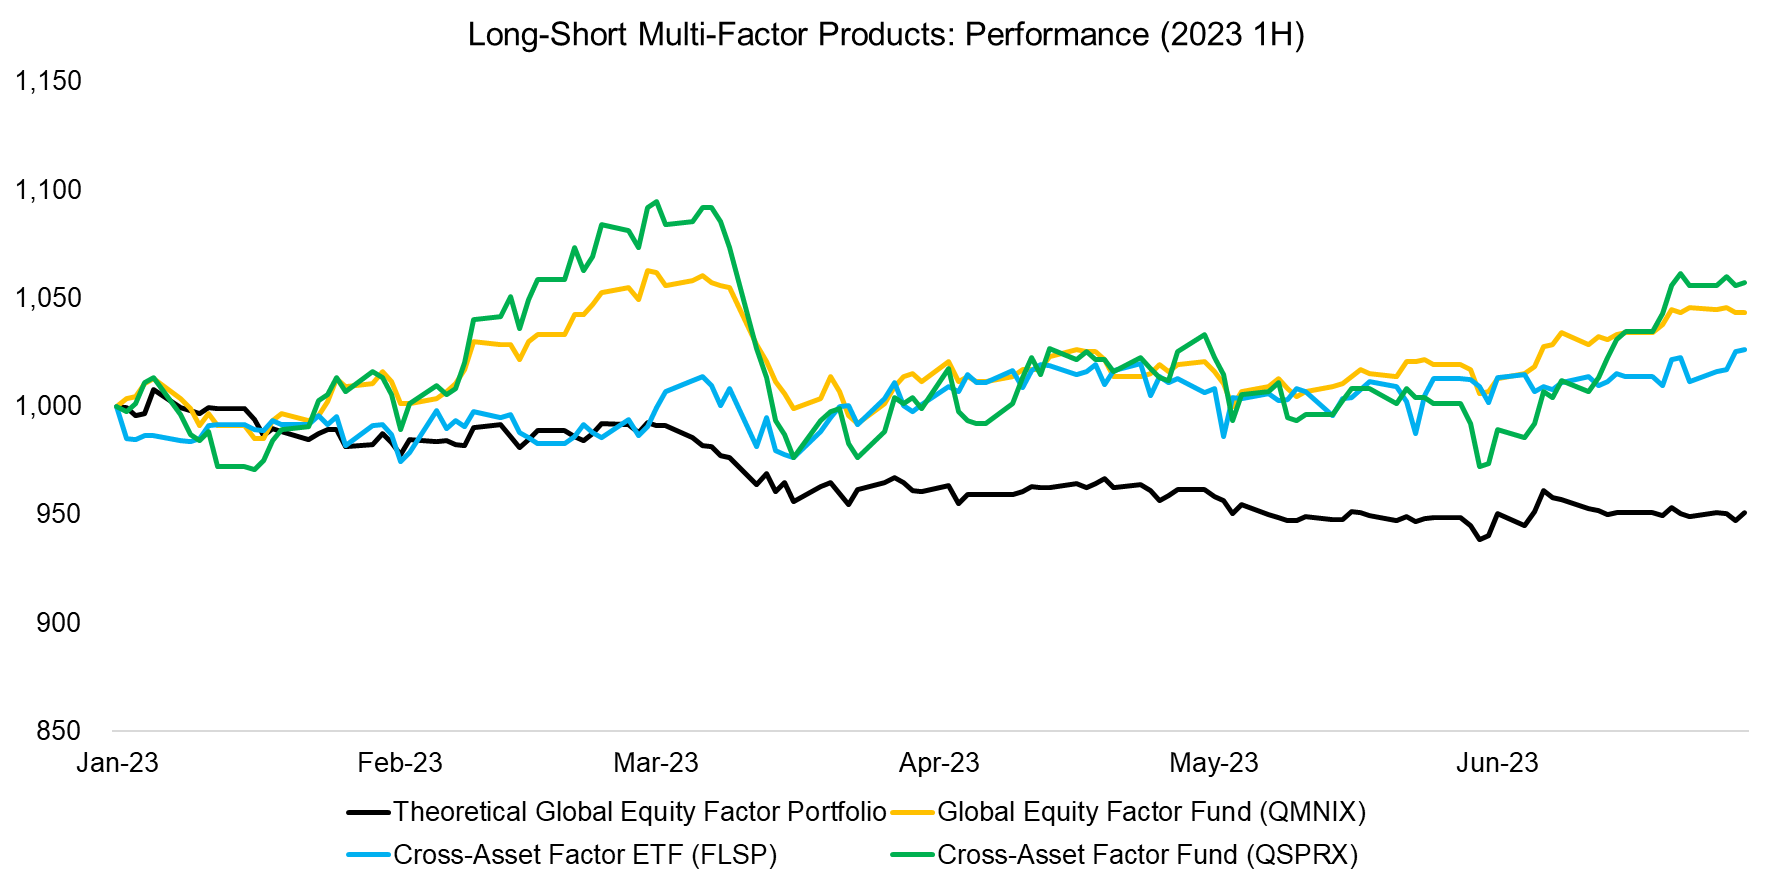 Long-Short Multi-Factor Products Performance (2023 1H)